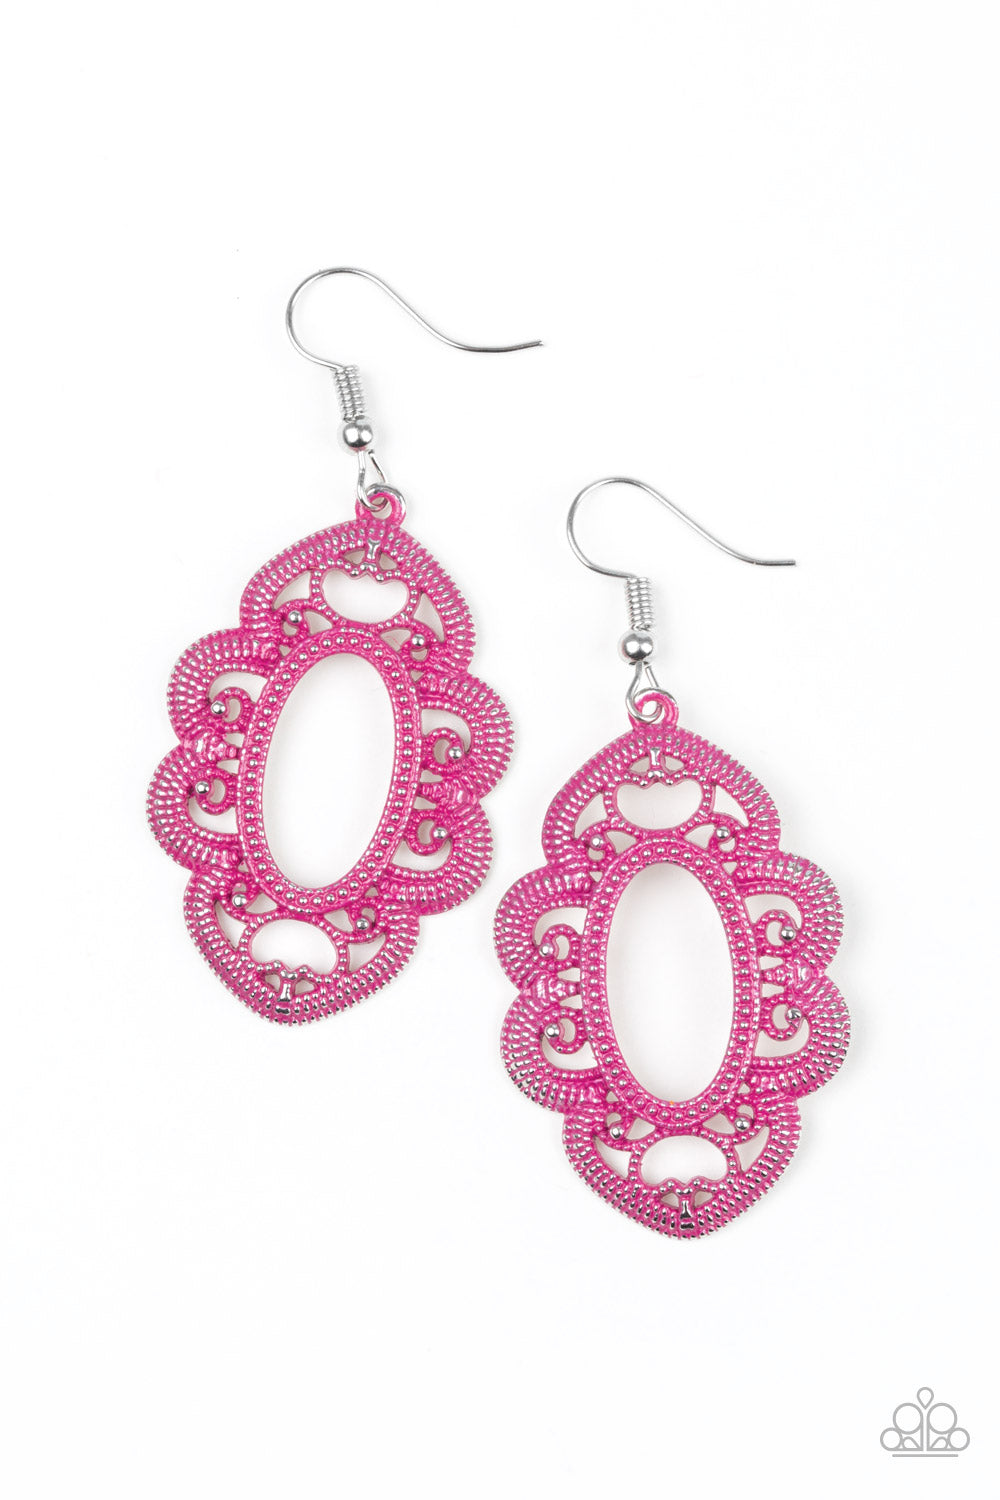 MANTRAS AND MANDALAS - PINK OVAL SCALLOPED SILVER FILIGREE FRAME EARRINGS